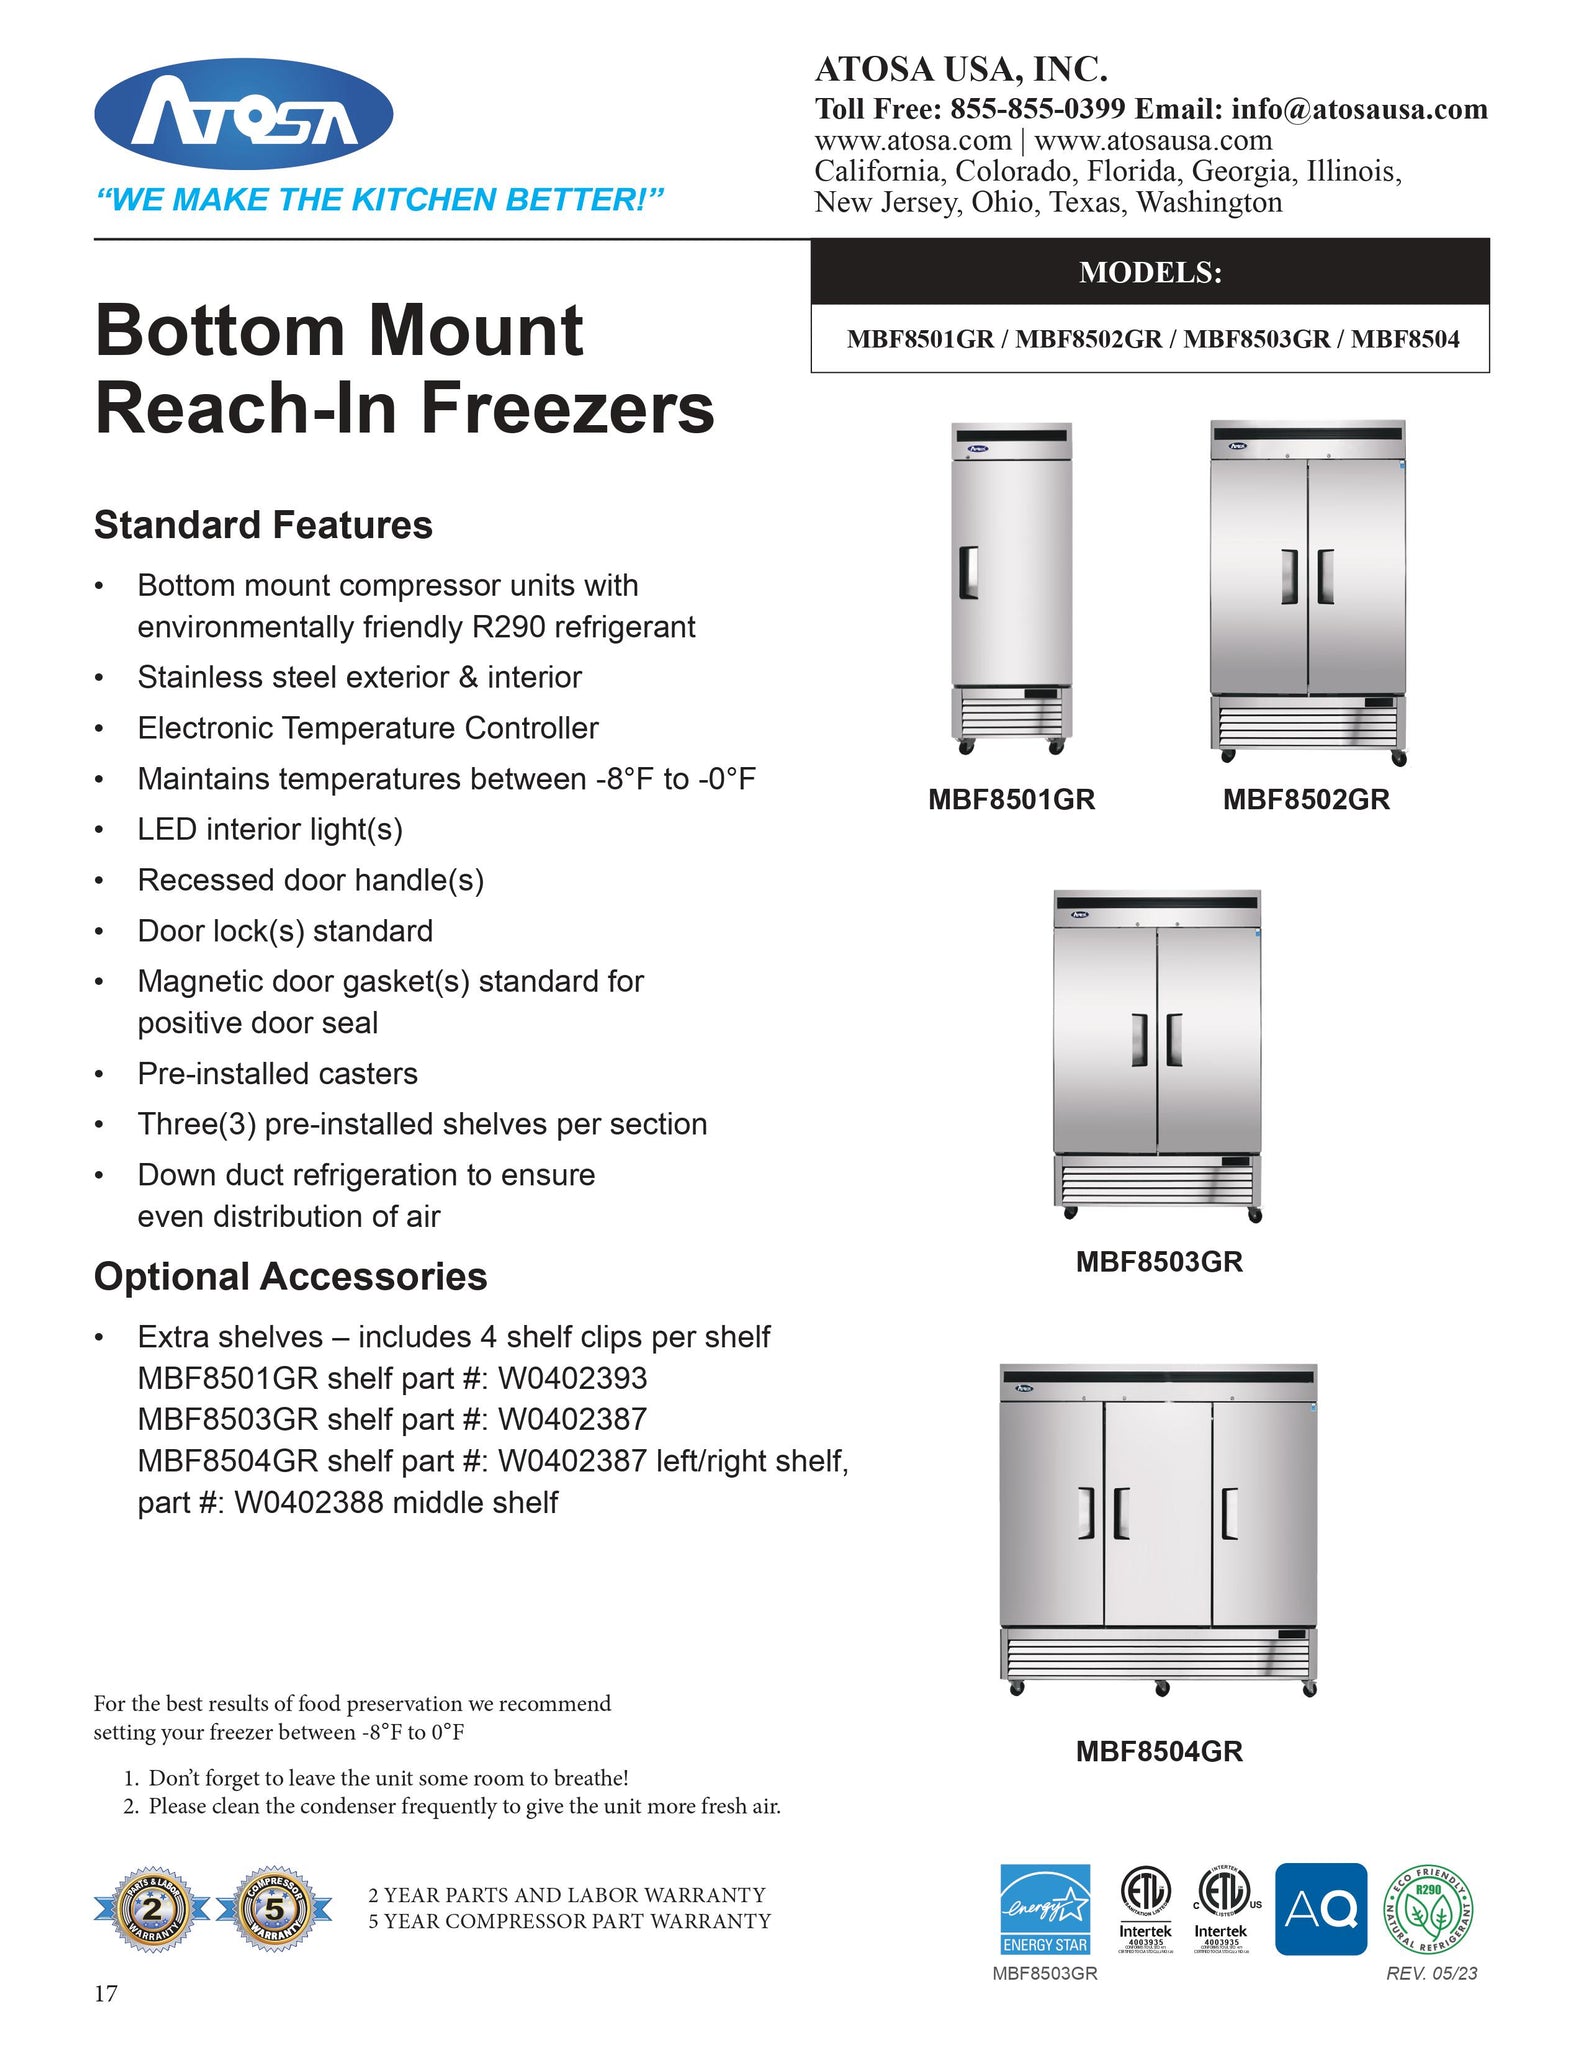 Atosa MBF8503GR 54" Two Section Solid Door Reach-In Freezer